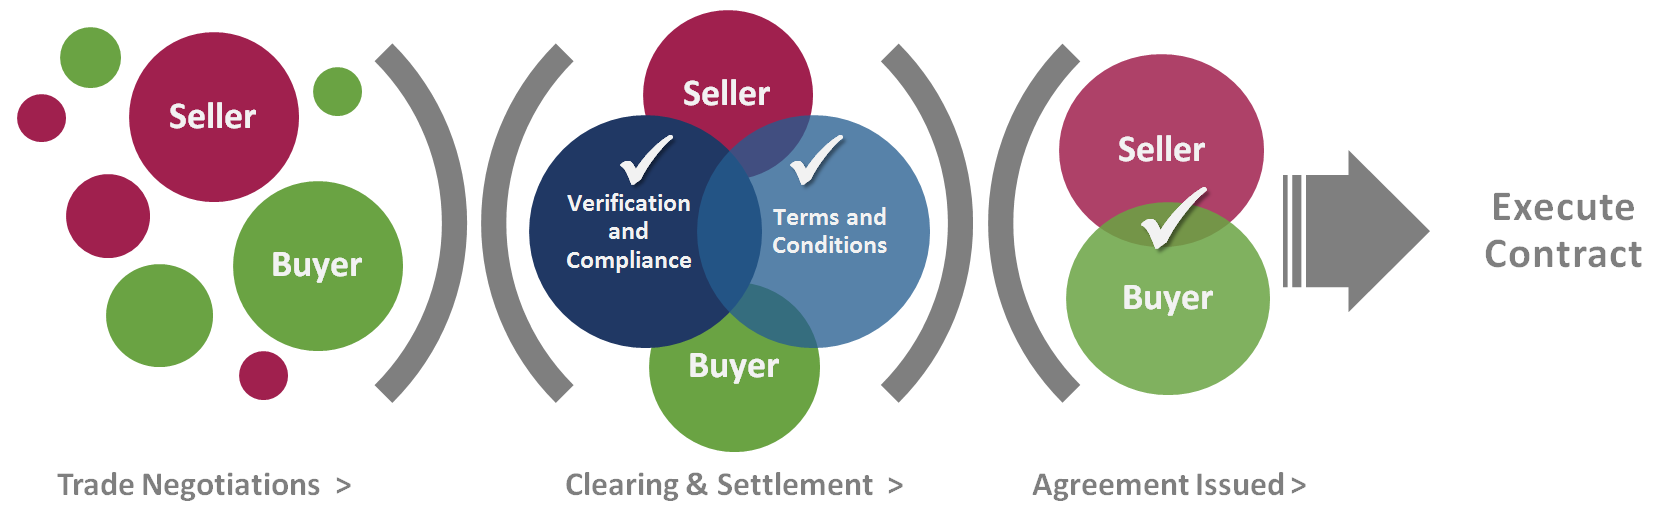 Clearing & Settlement Diagram